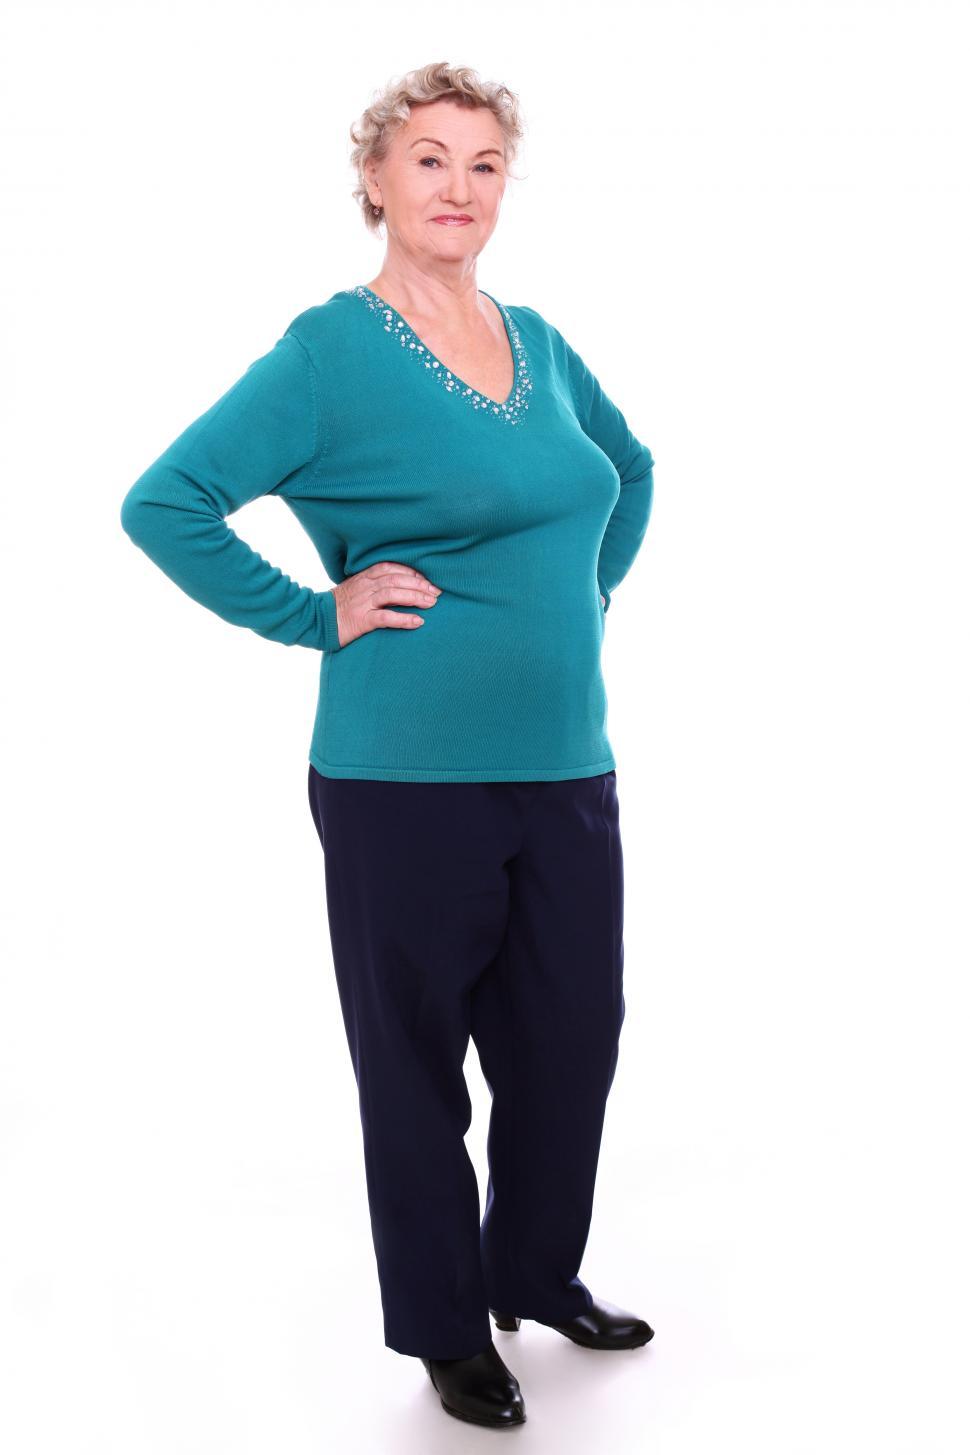 Download Free Stock Photo of Elderly woman standing, looking at the camera 